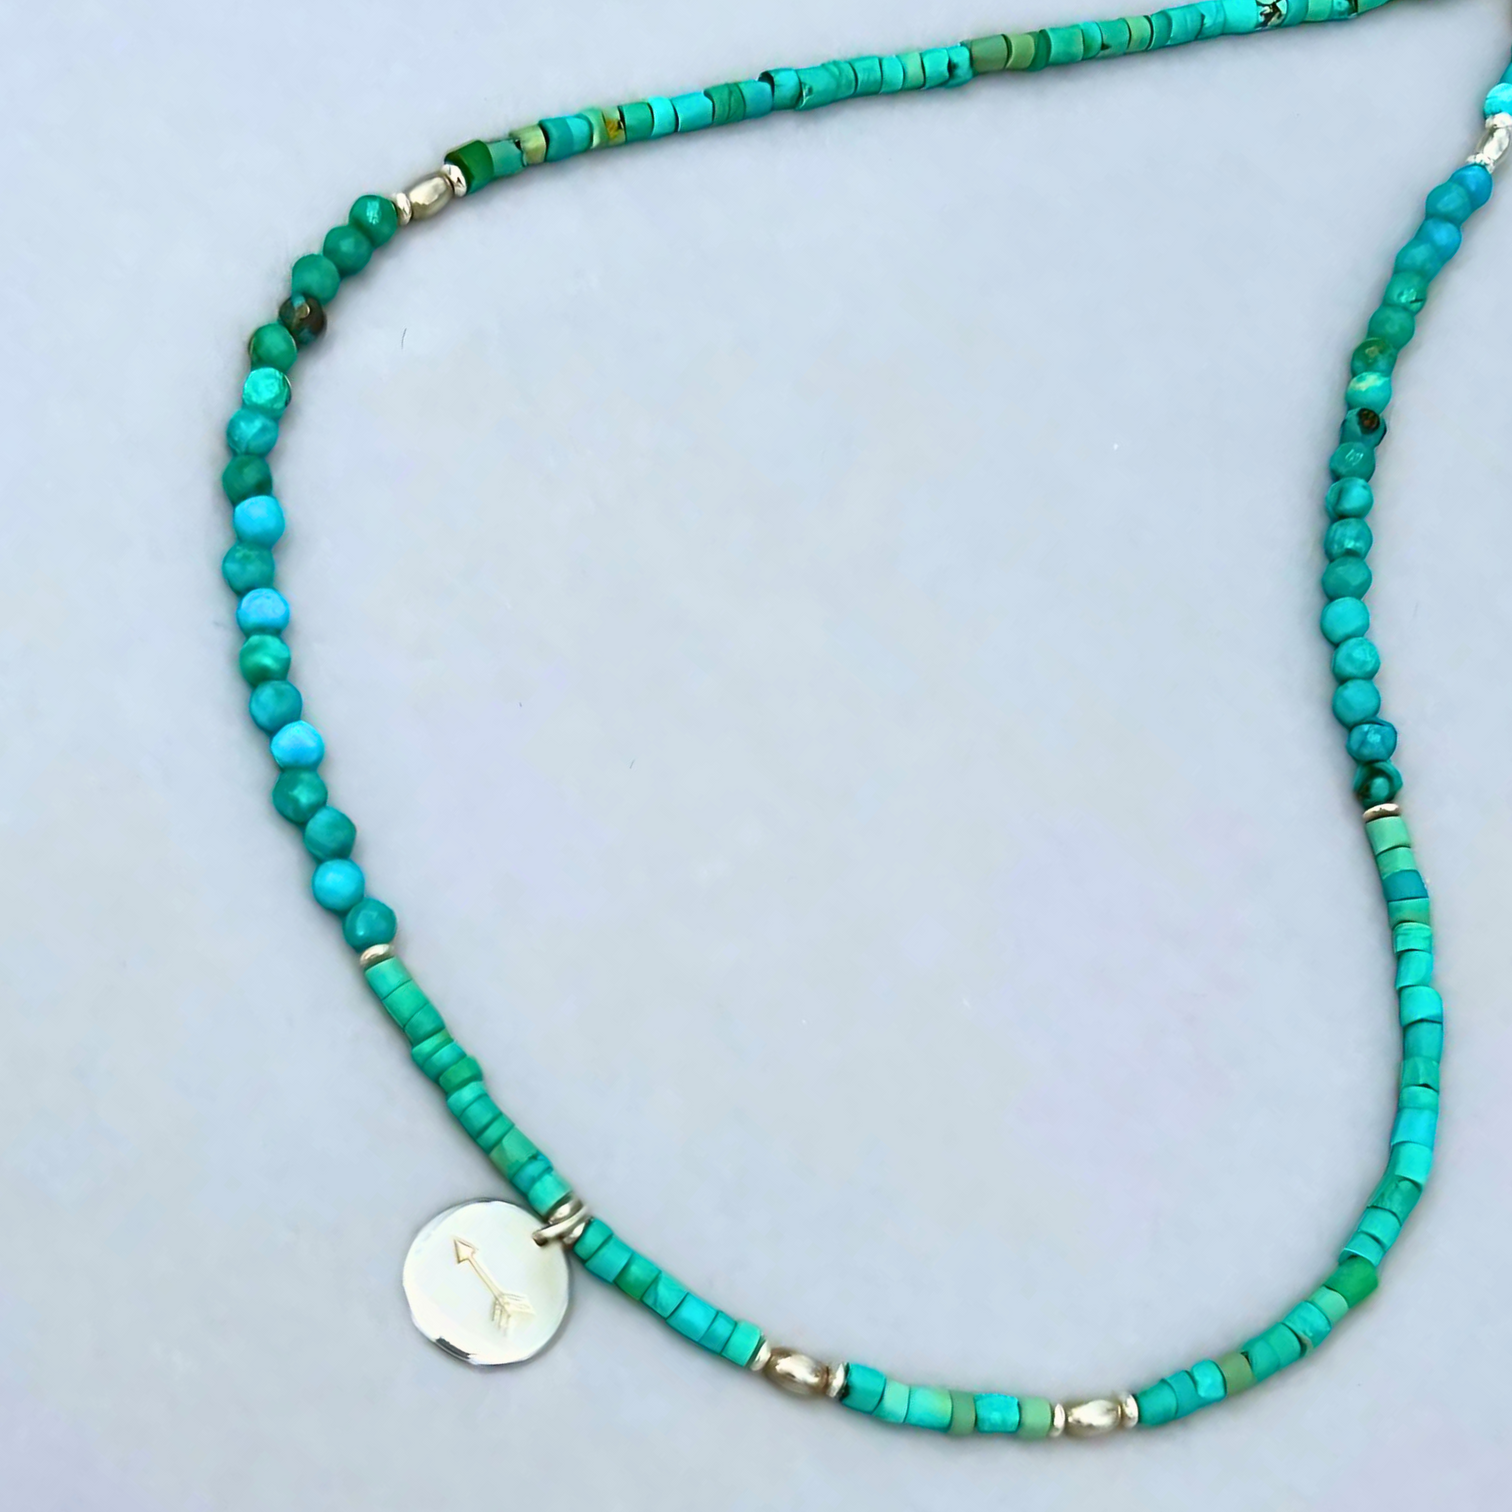 Free Spirit Necklace from Le BijouBIjou made with turquoise rondelles and a silver charm with an arrow. Detail of Cham and turquoises.